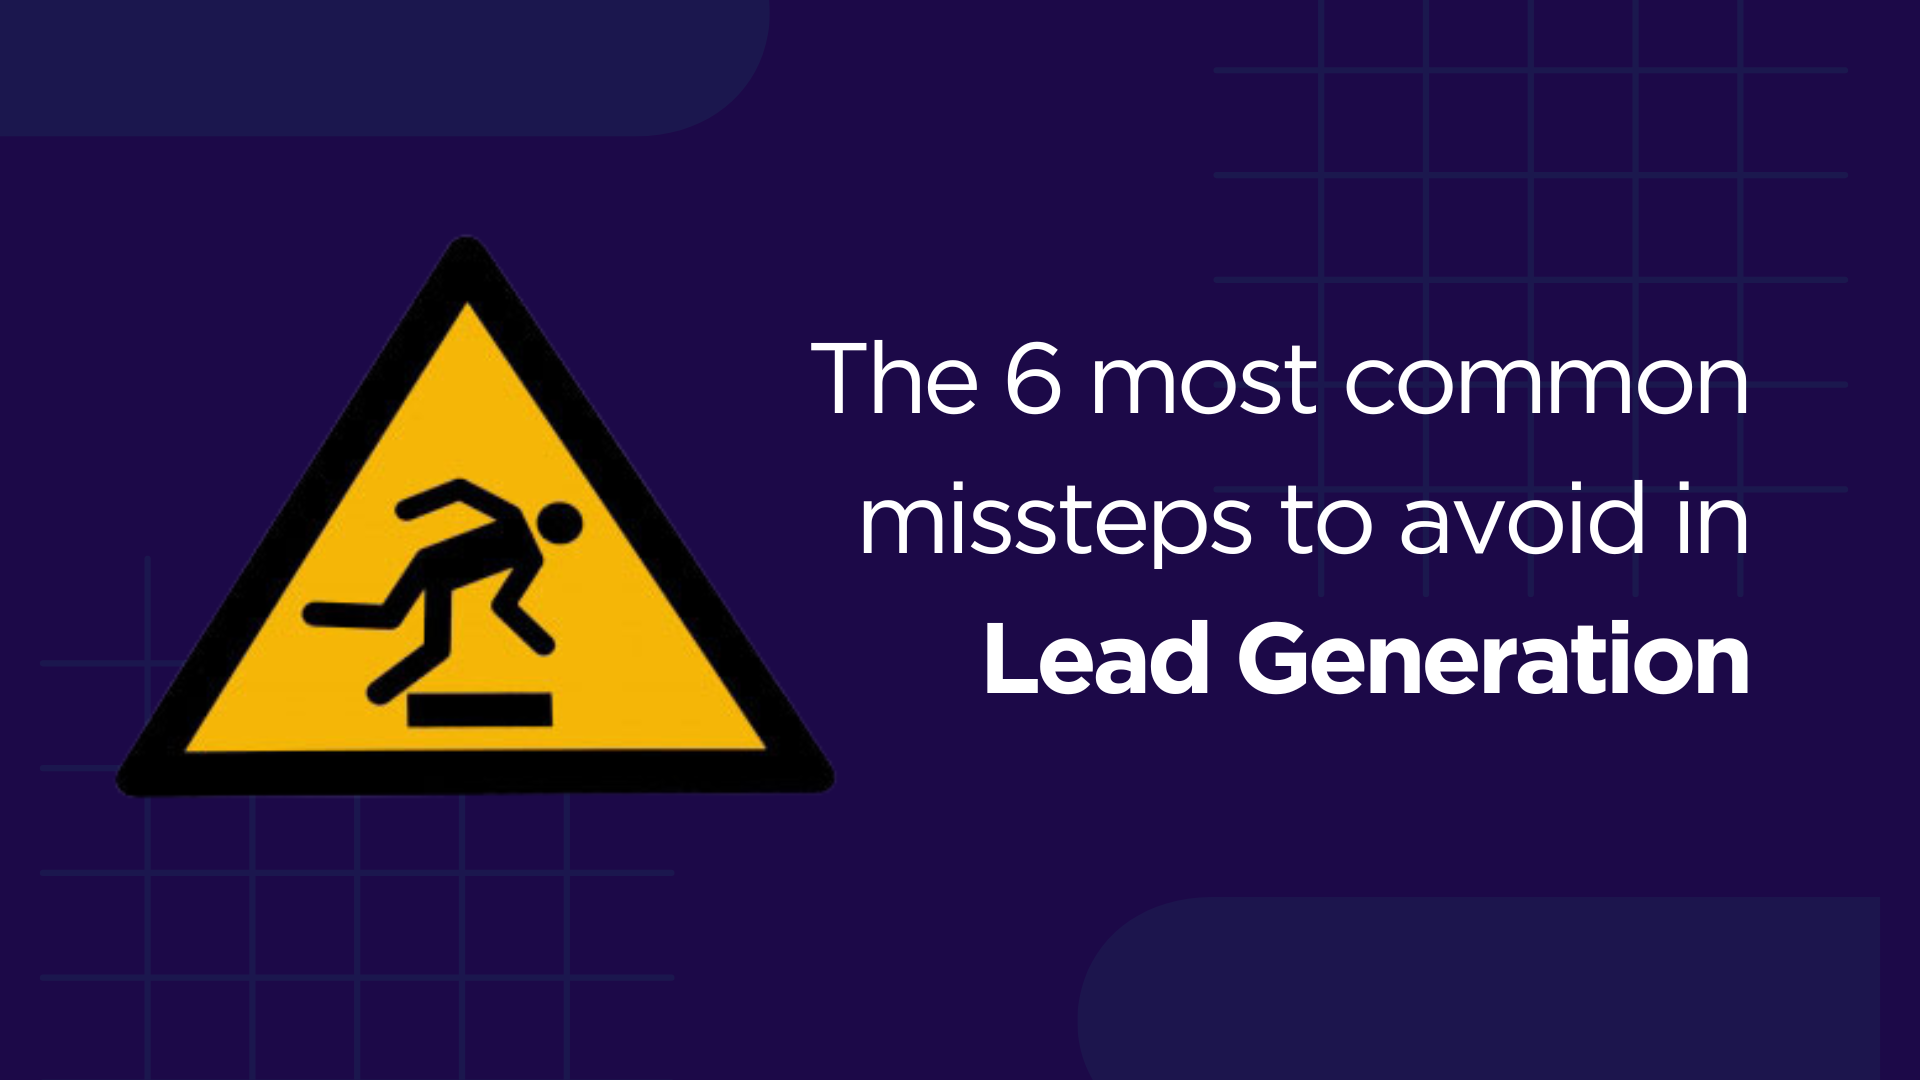 The 6 most common missteps to avoid in Lead Generation